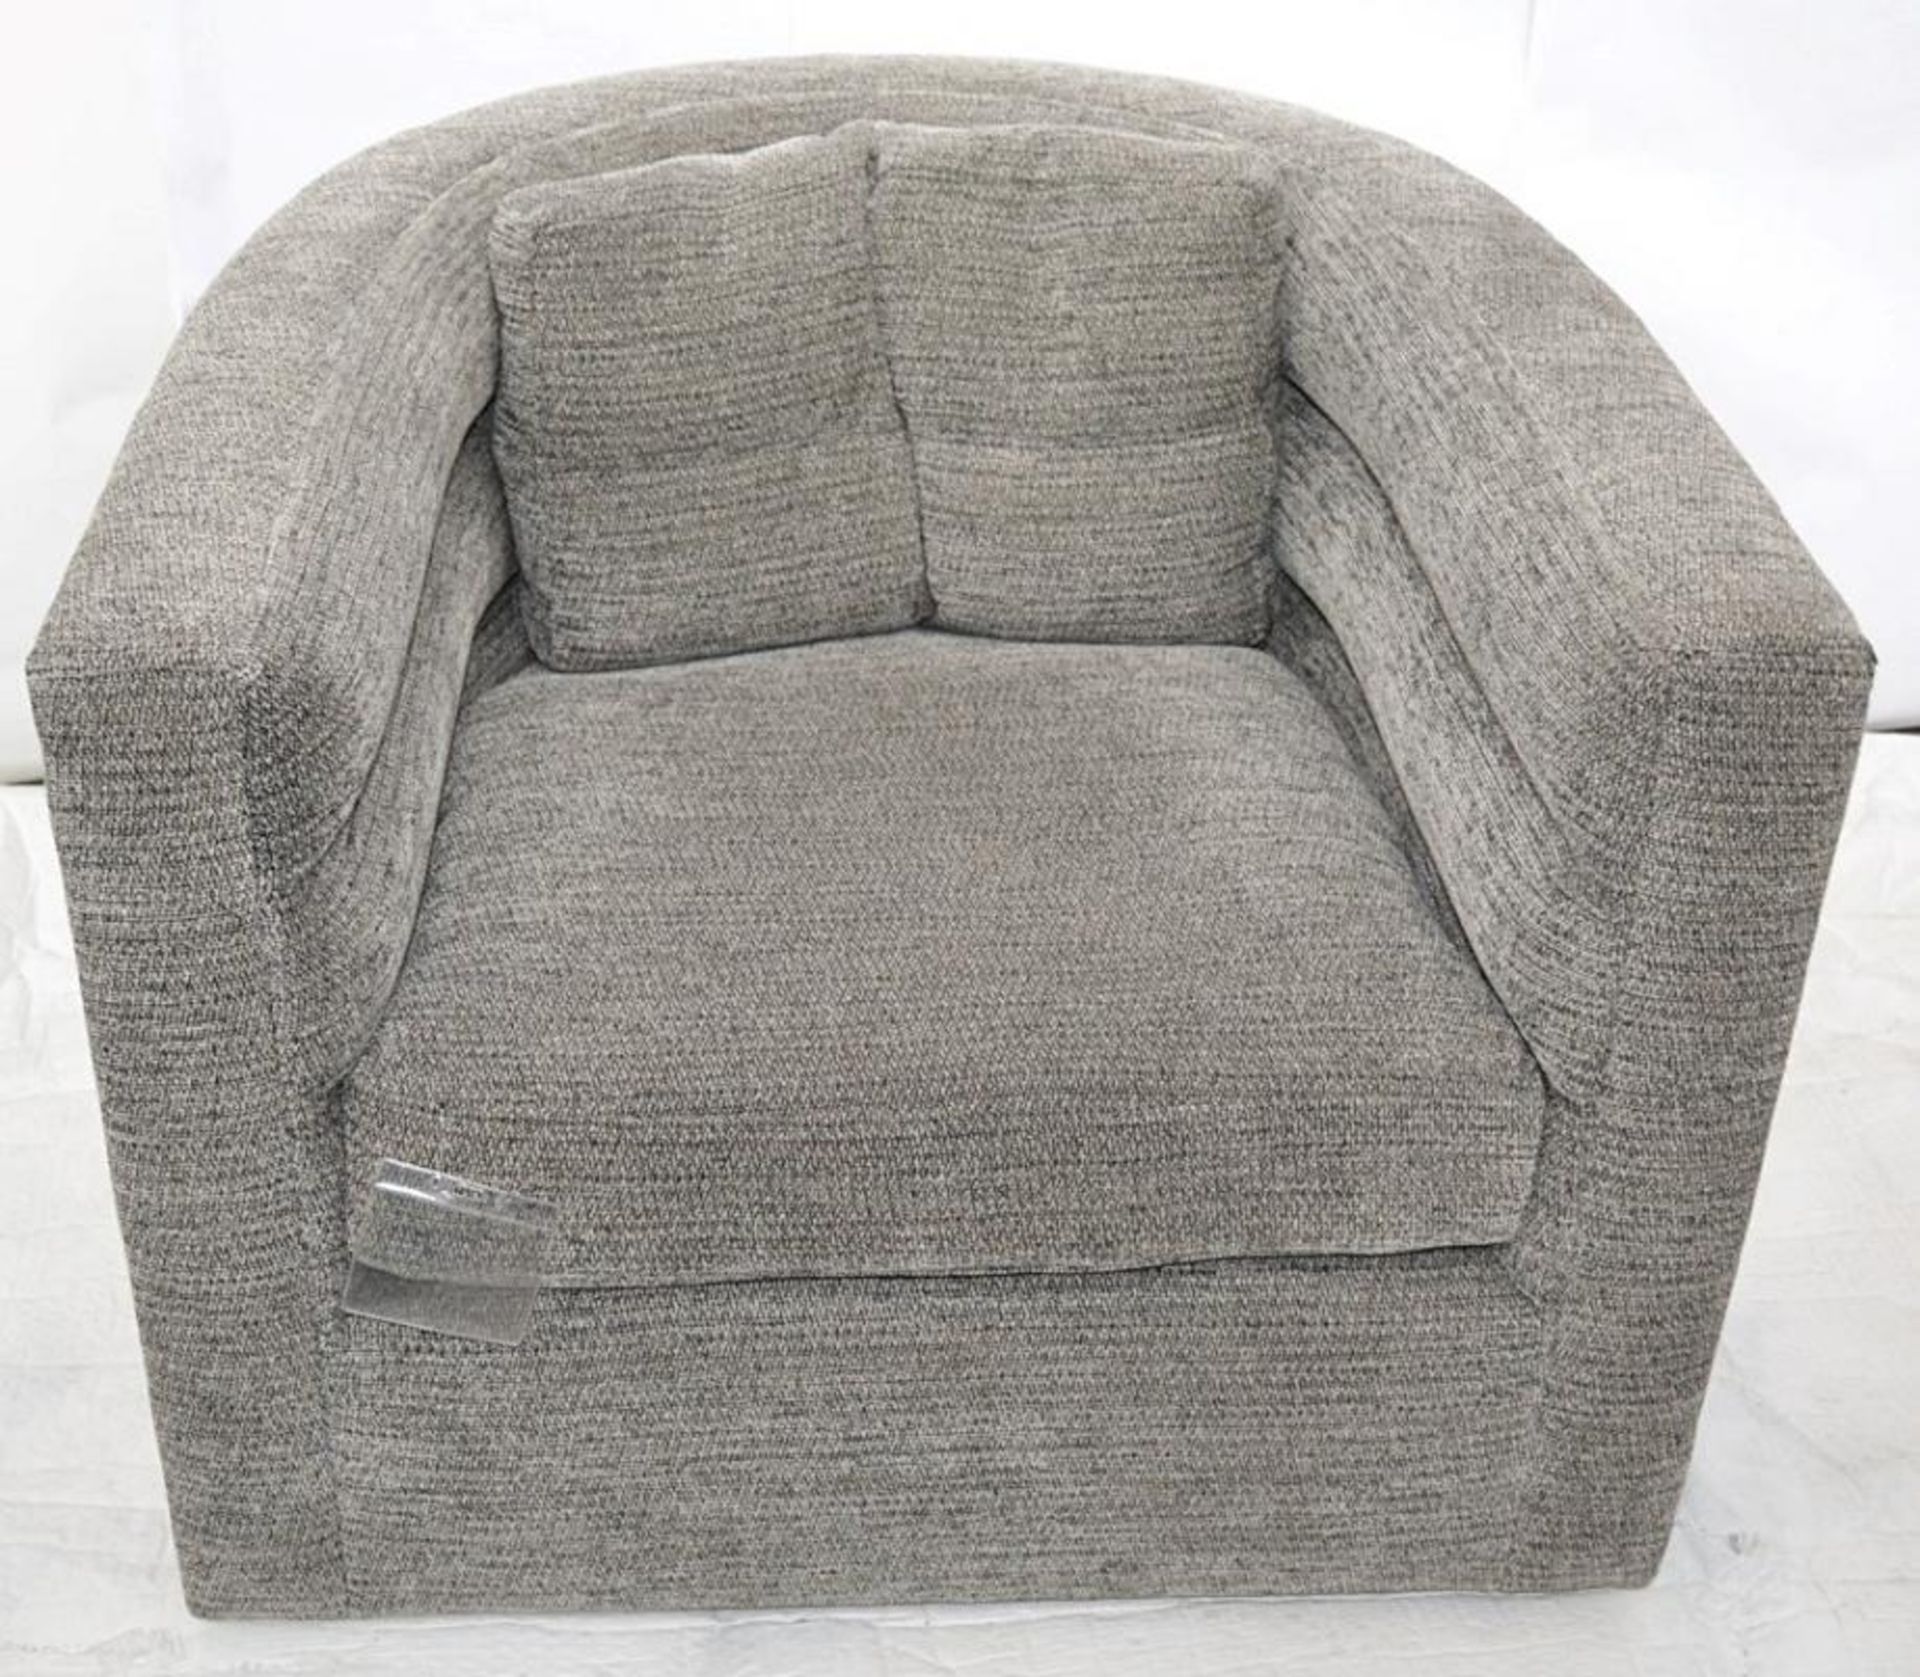 1 x KELLY WEARSTLER Melrose Club Chair In Grey - Dimensions: W36" x D38" x H28" - Ref: 5223289 - CL0 - Image 19 of 24